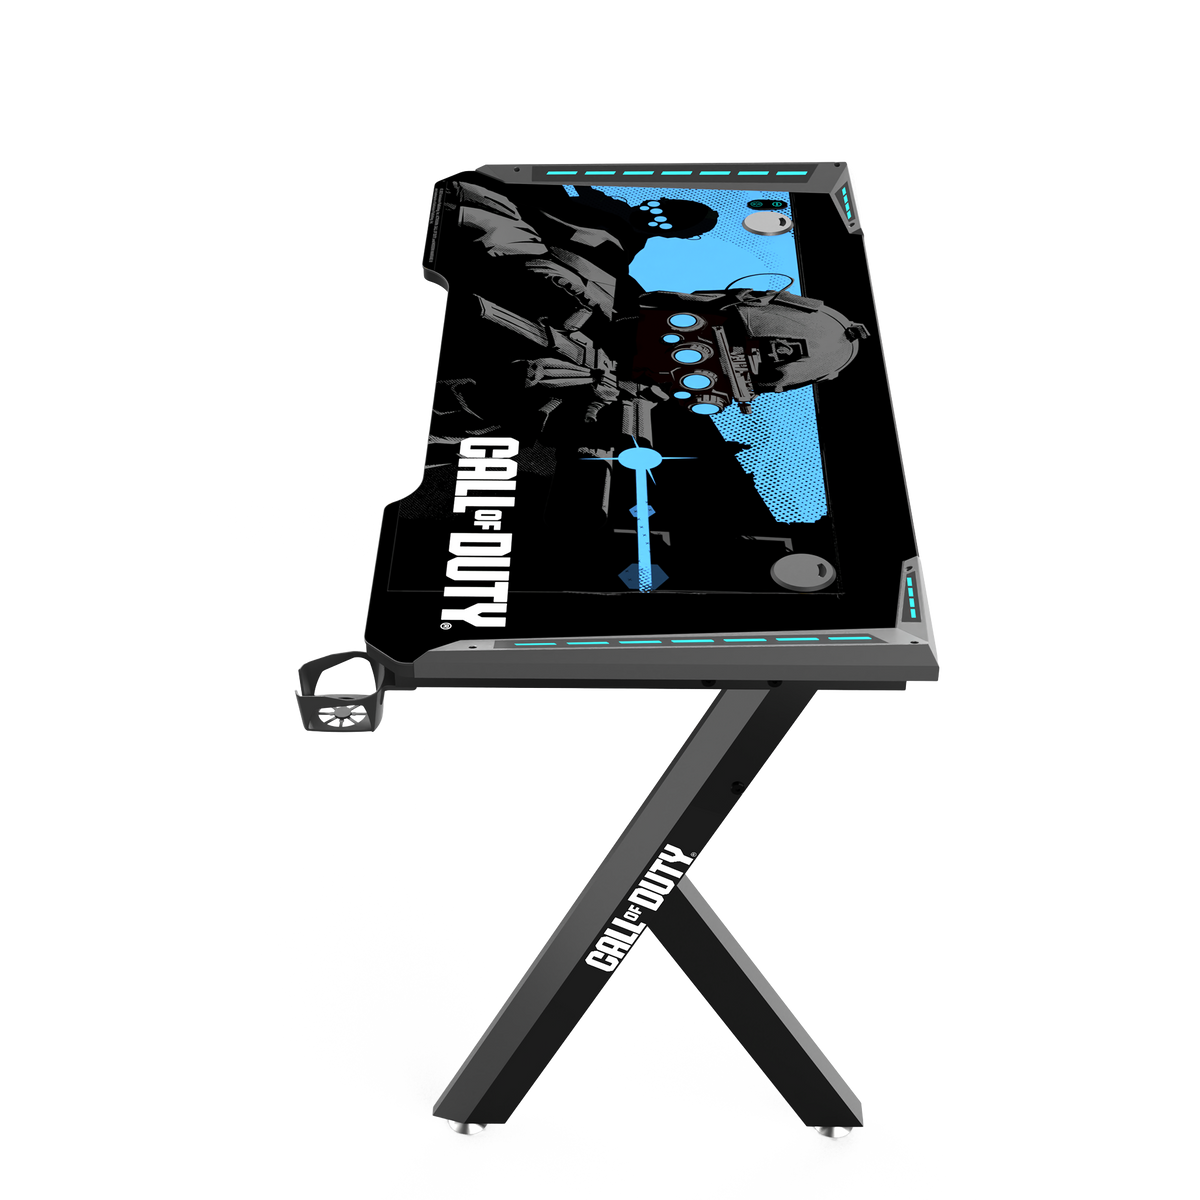 Call Of Duty (COD) x  GAMEON Hawksbill Series RGB Flowing Light Gaming Desk (Size: 1200-600-720mm) With (800*300*3mm - Mouse pad), Headphone Hook & Cup Holder - Black/Blue